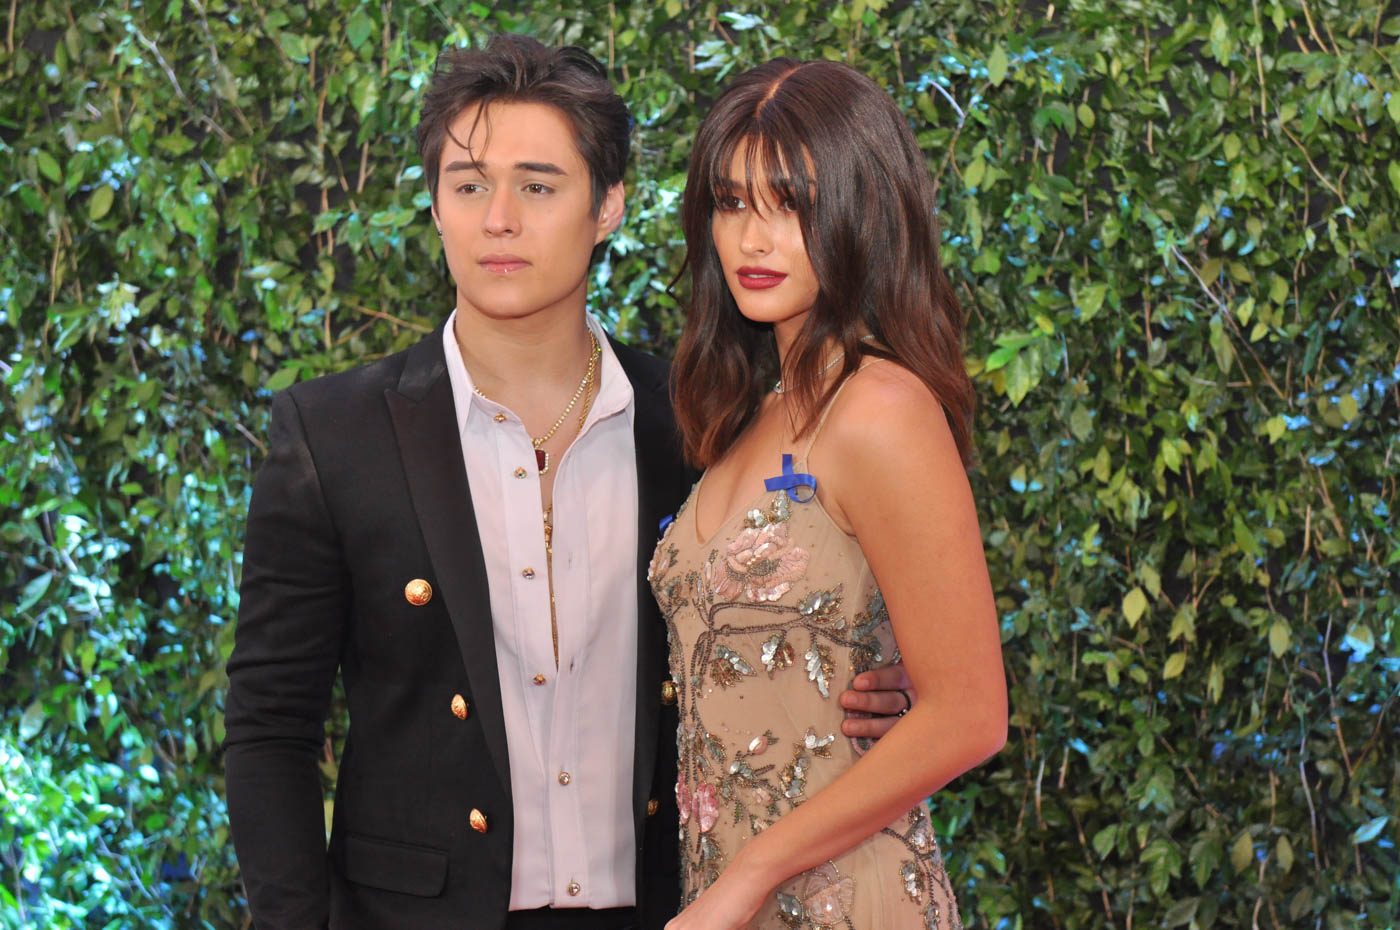 Liza Soberano, Enrique Gil publicly DTR: They’ve been together for ‘more than two years’